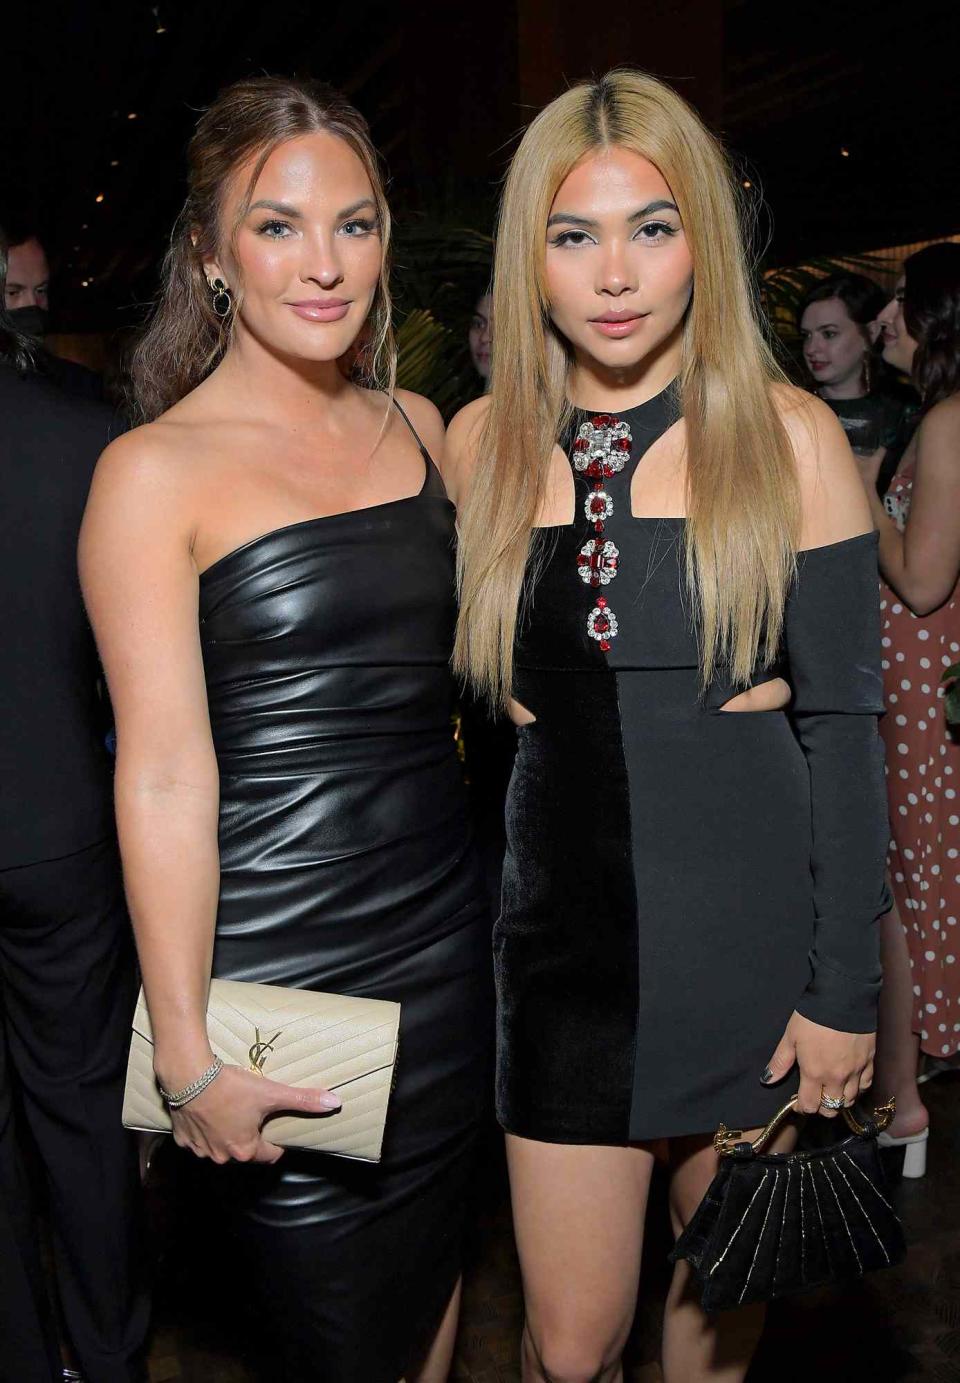 Becca Tilley and Hayley Kiyoko attend &quot;Elle Hollywood Rising&quot; presented by Polo Ralph Lauren and Hulu on May 18, 2022 in Los Angeles, California